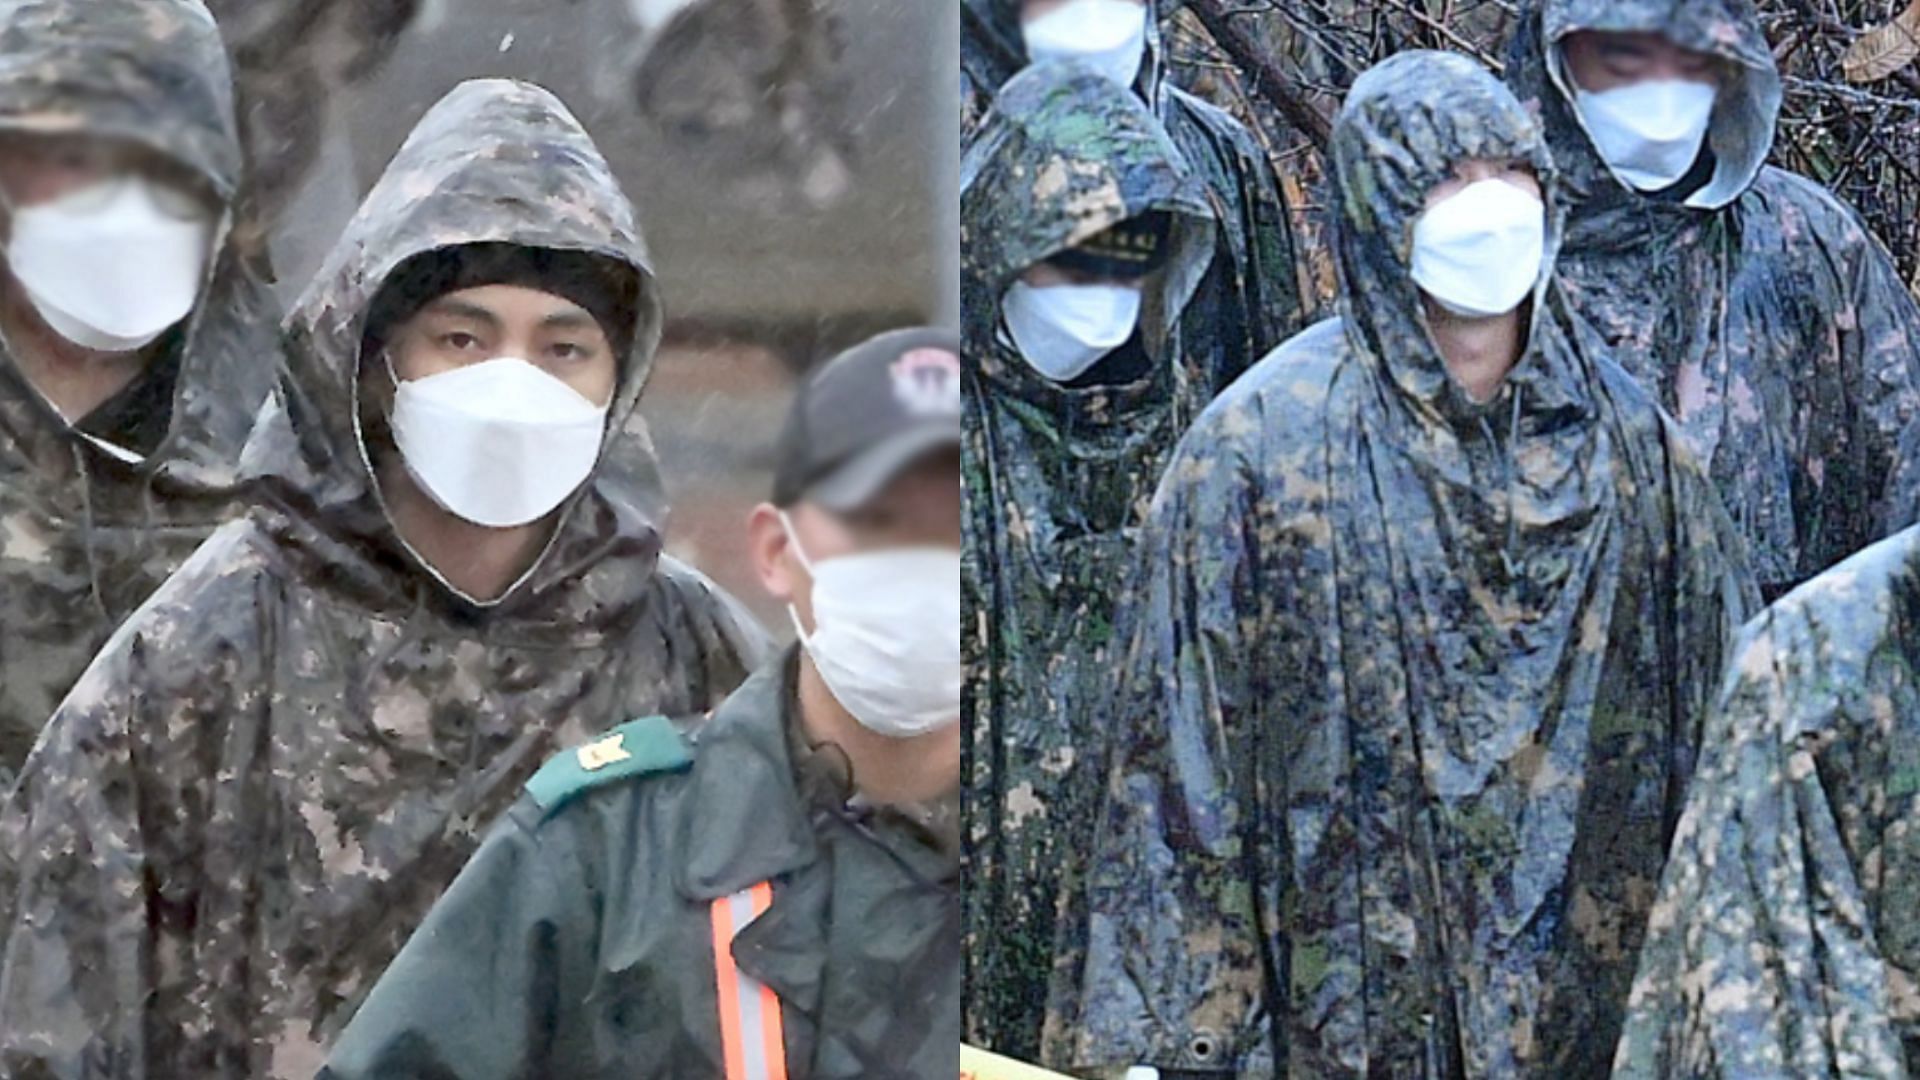 BTS V and RM&#039; first photos in their military uniforms (Image via My Music Taste)